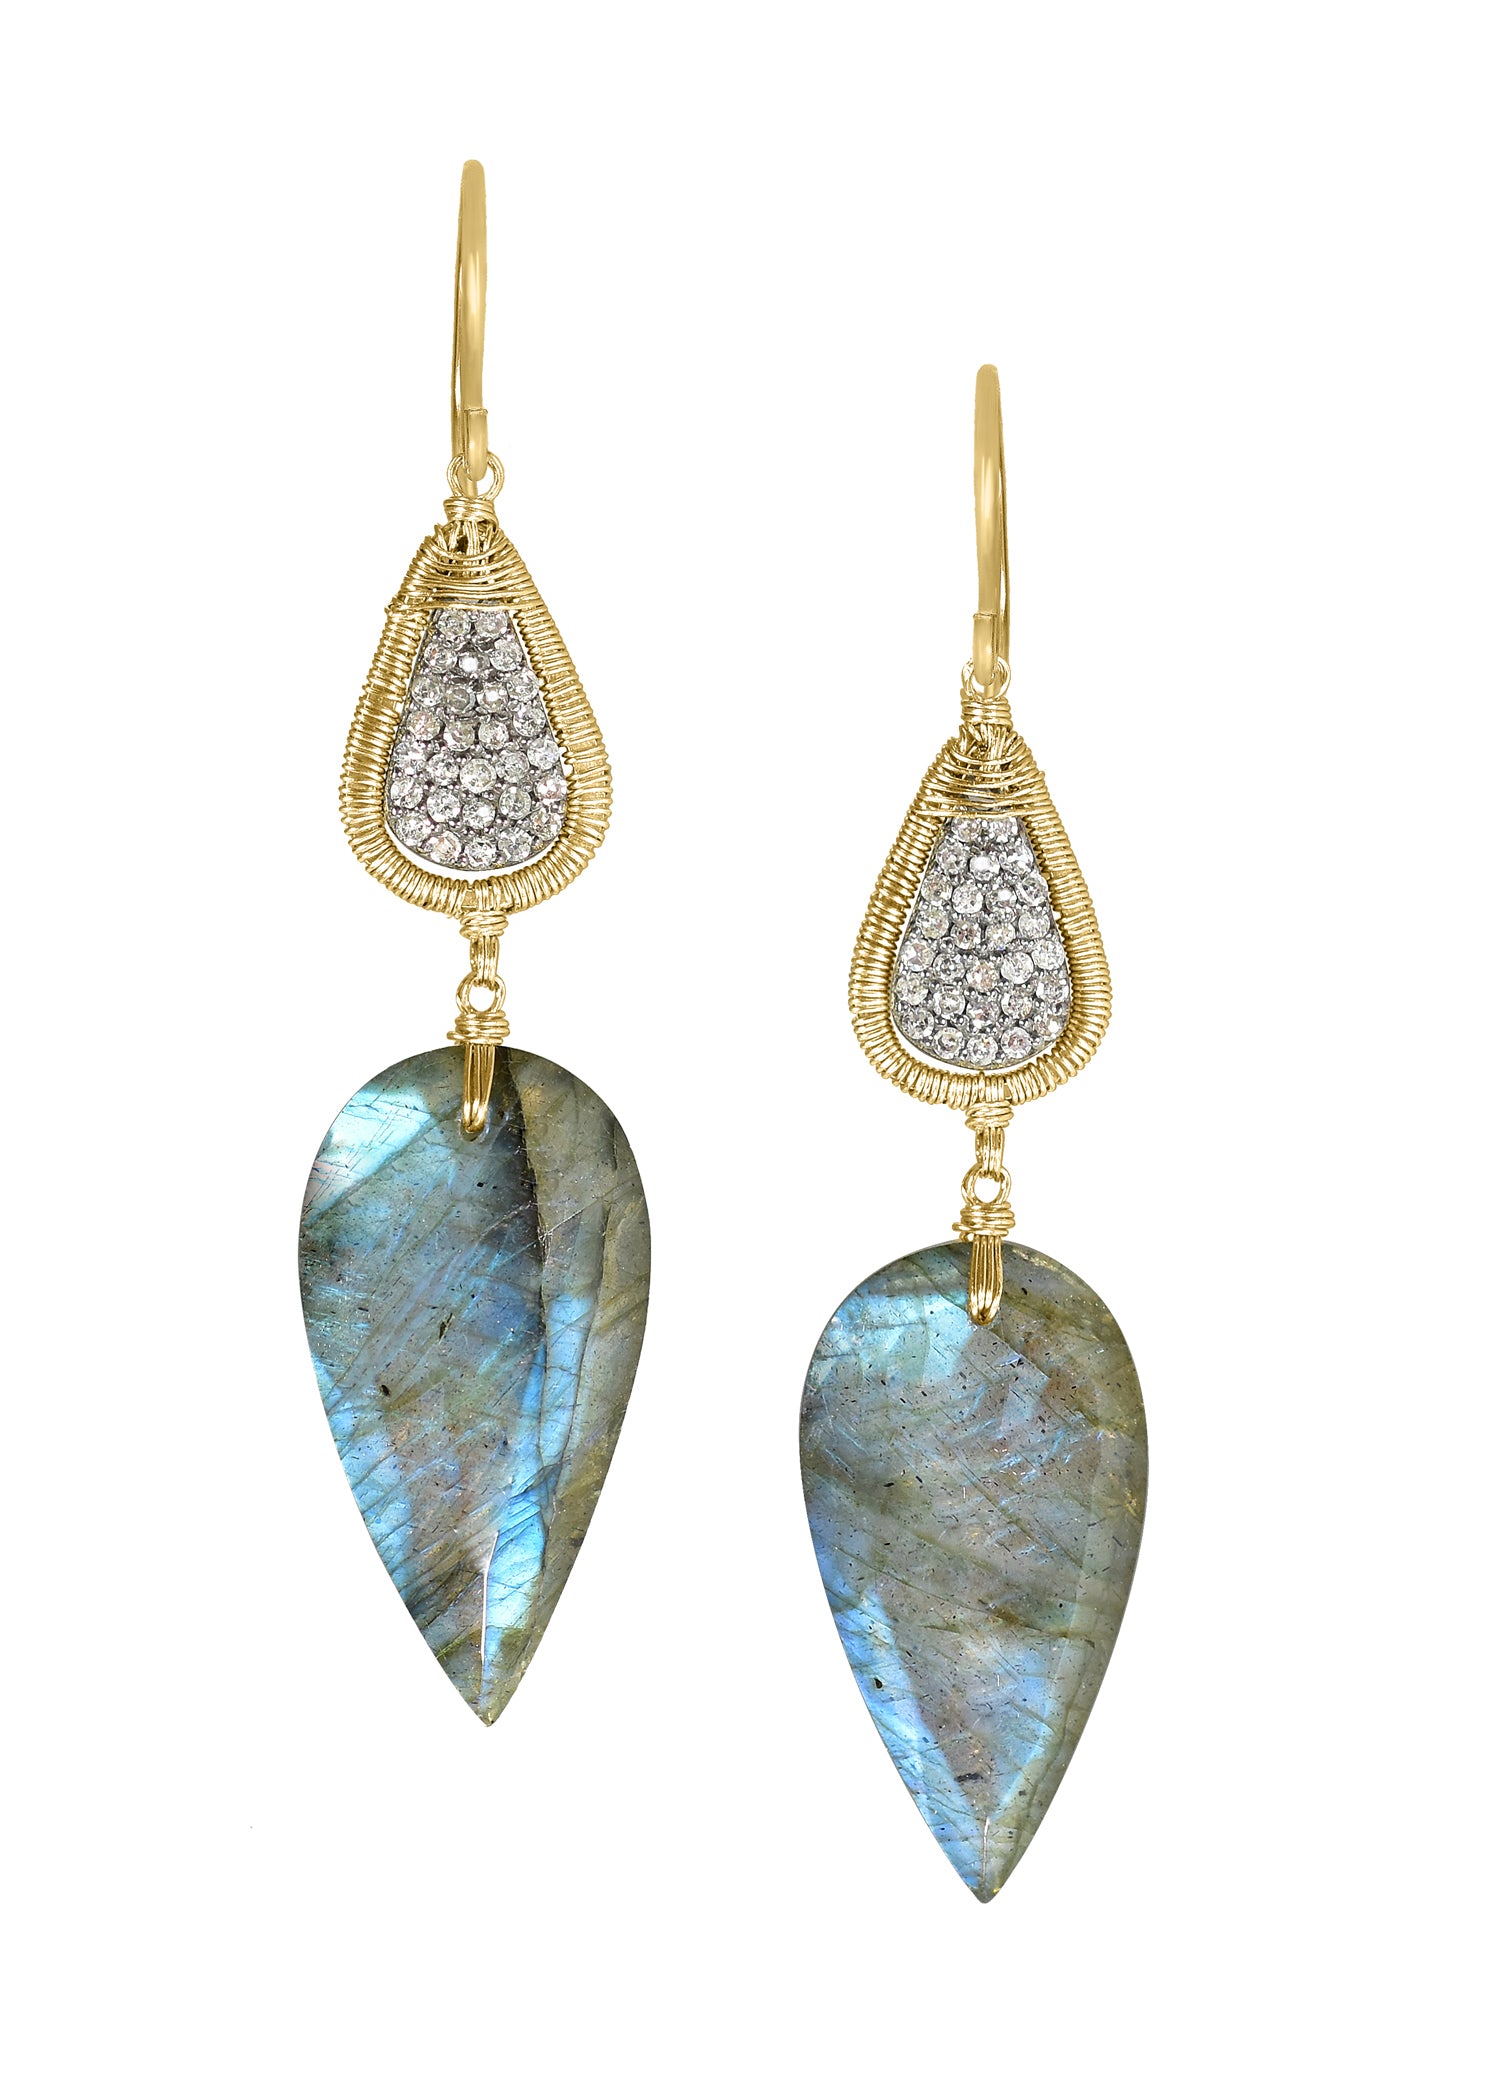 Diamond Labradorite 14k gold Sterling silver Mixed metal Special order only Earrings measure 2-1/4" in length (including the ear wires) and 1/2" in width at the widest point Handmade in our Los Angeles studio